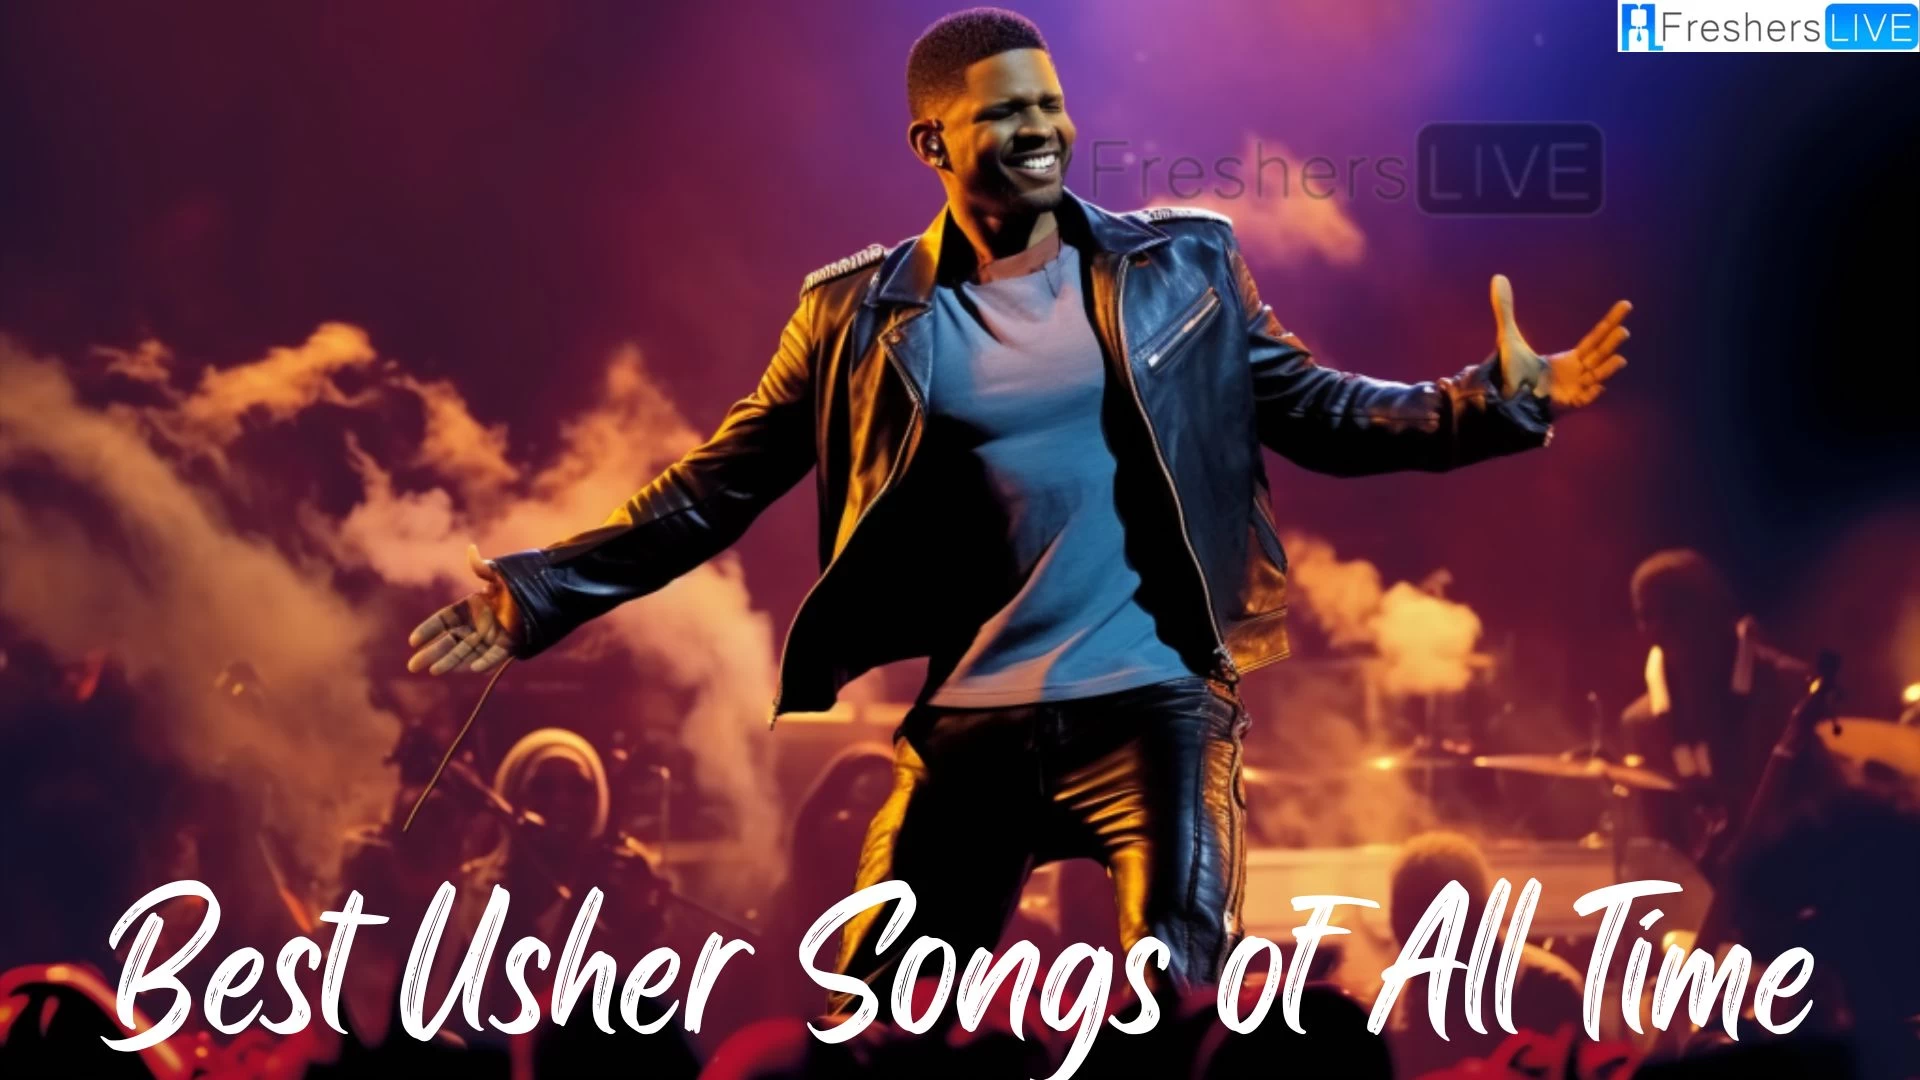 Best Usher Songs of All Time - A Musical Journey Through Top 10 Hits